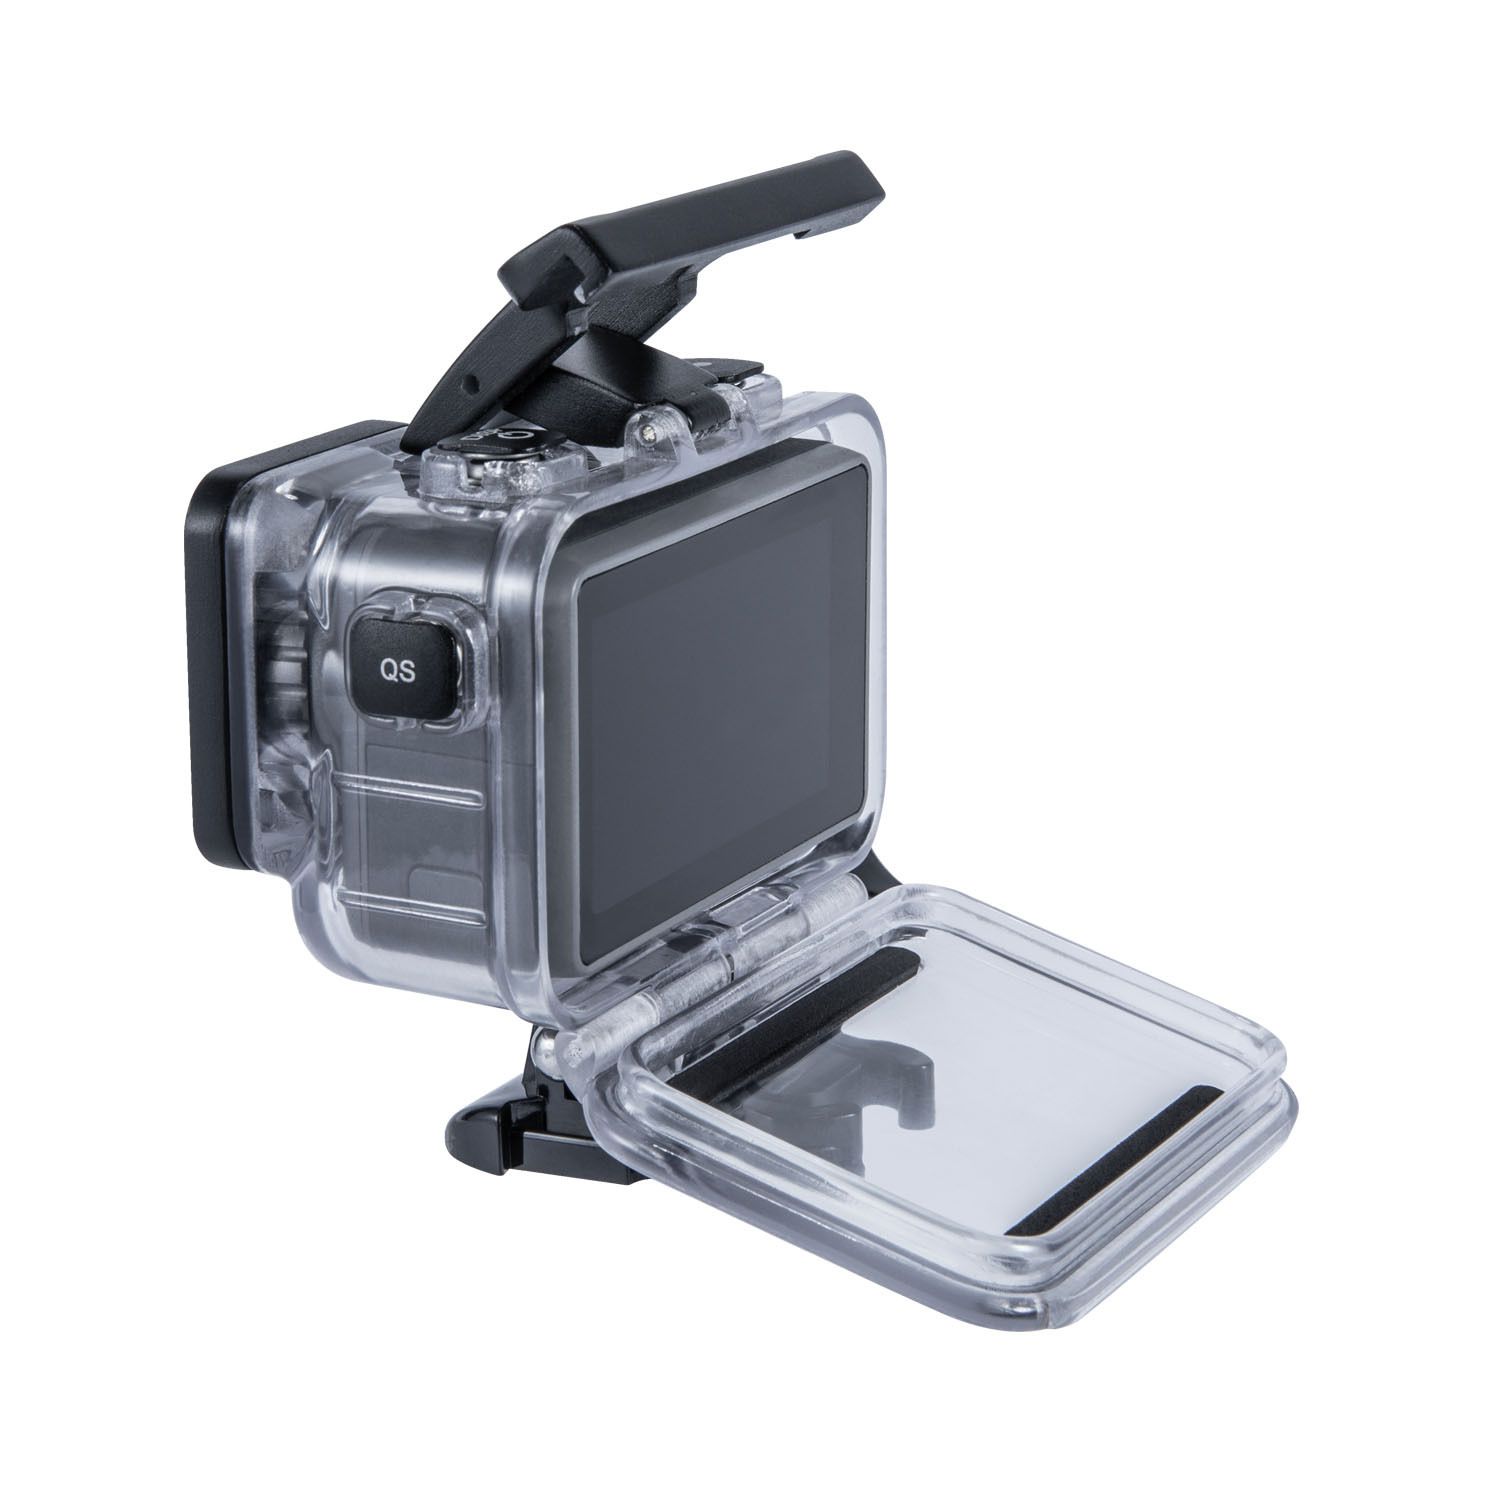 61M-Underwater-Diving-Waterproof-Dust-proof-Protective-Case-Shell-for-DJI-OSMO-Action-Sports-Camera-1559270